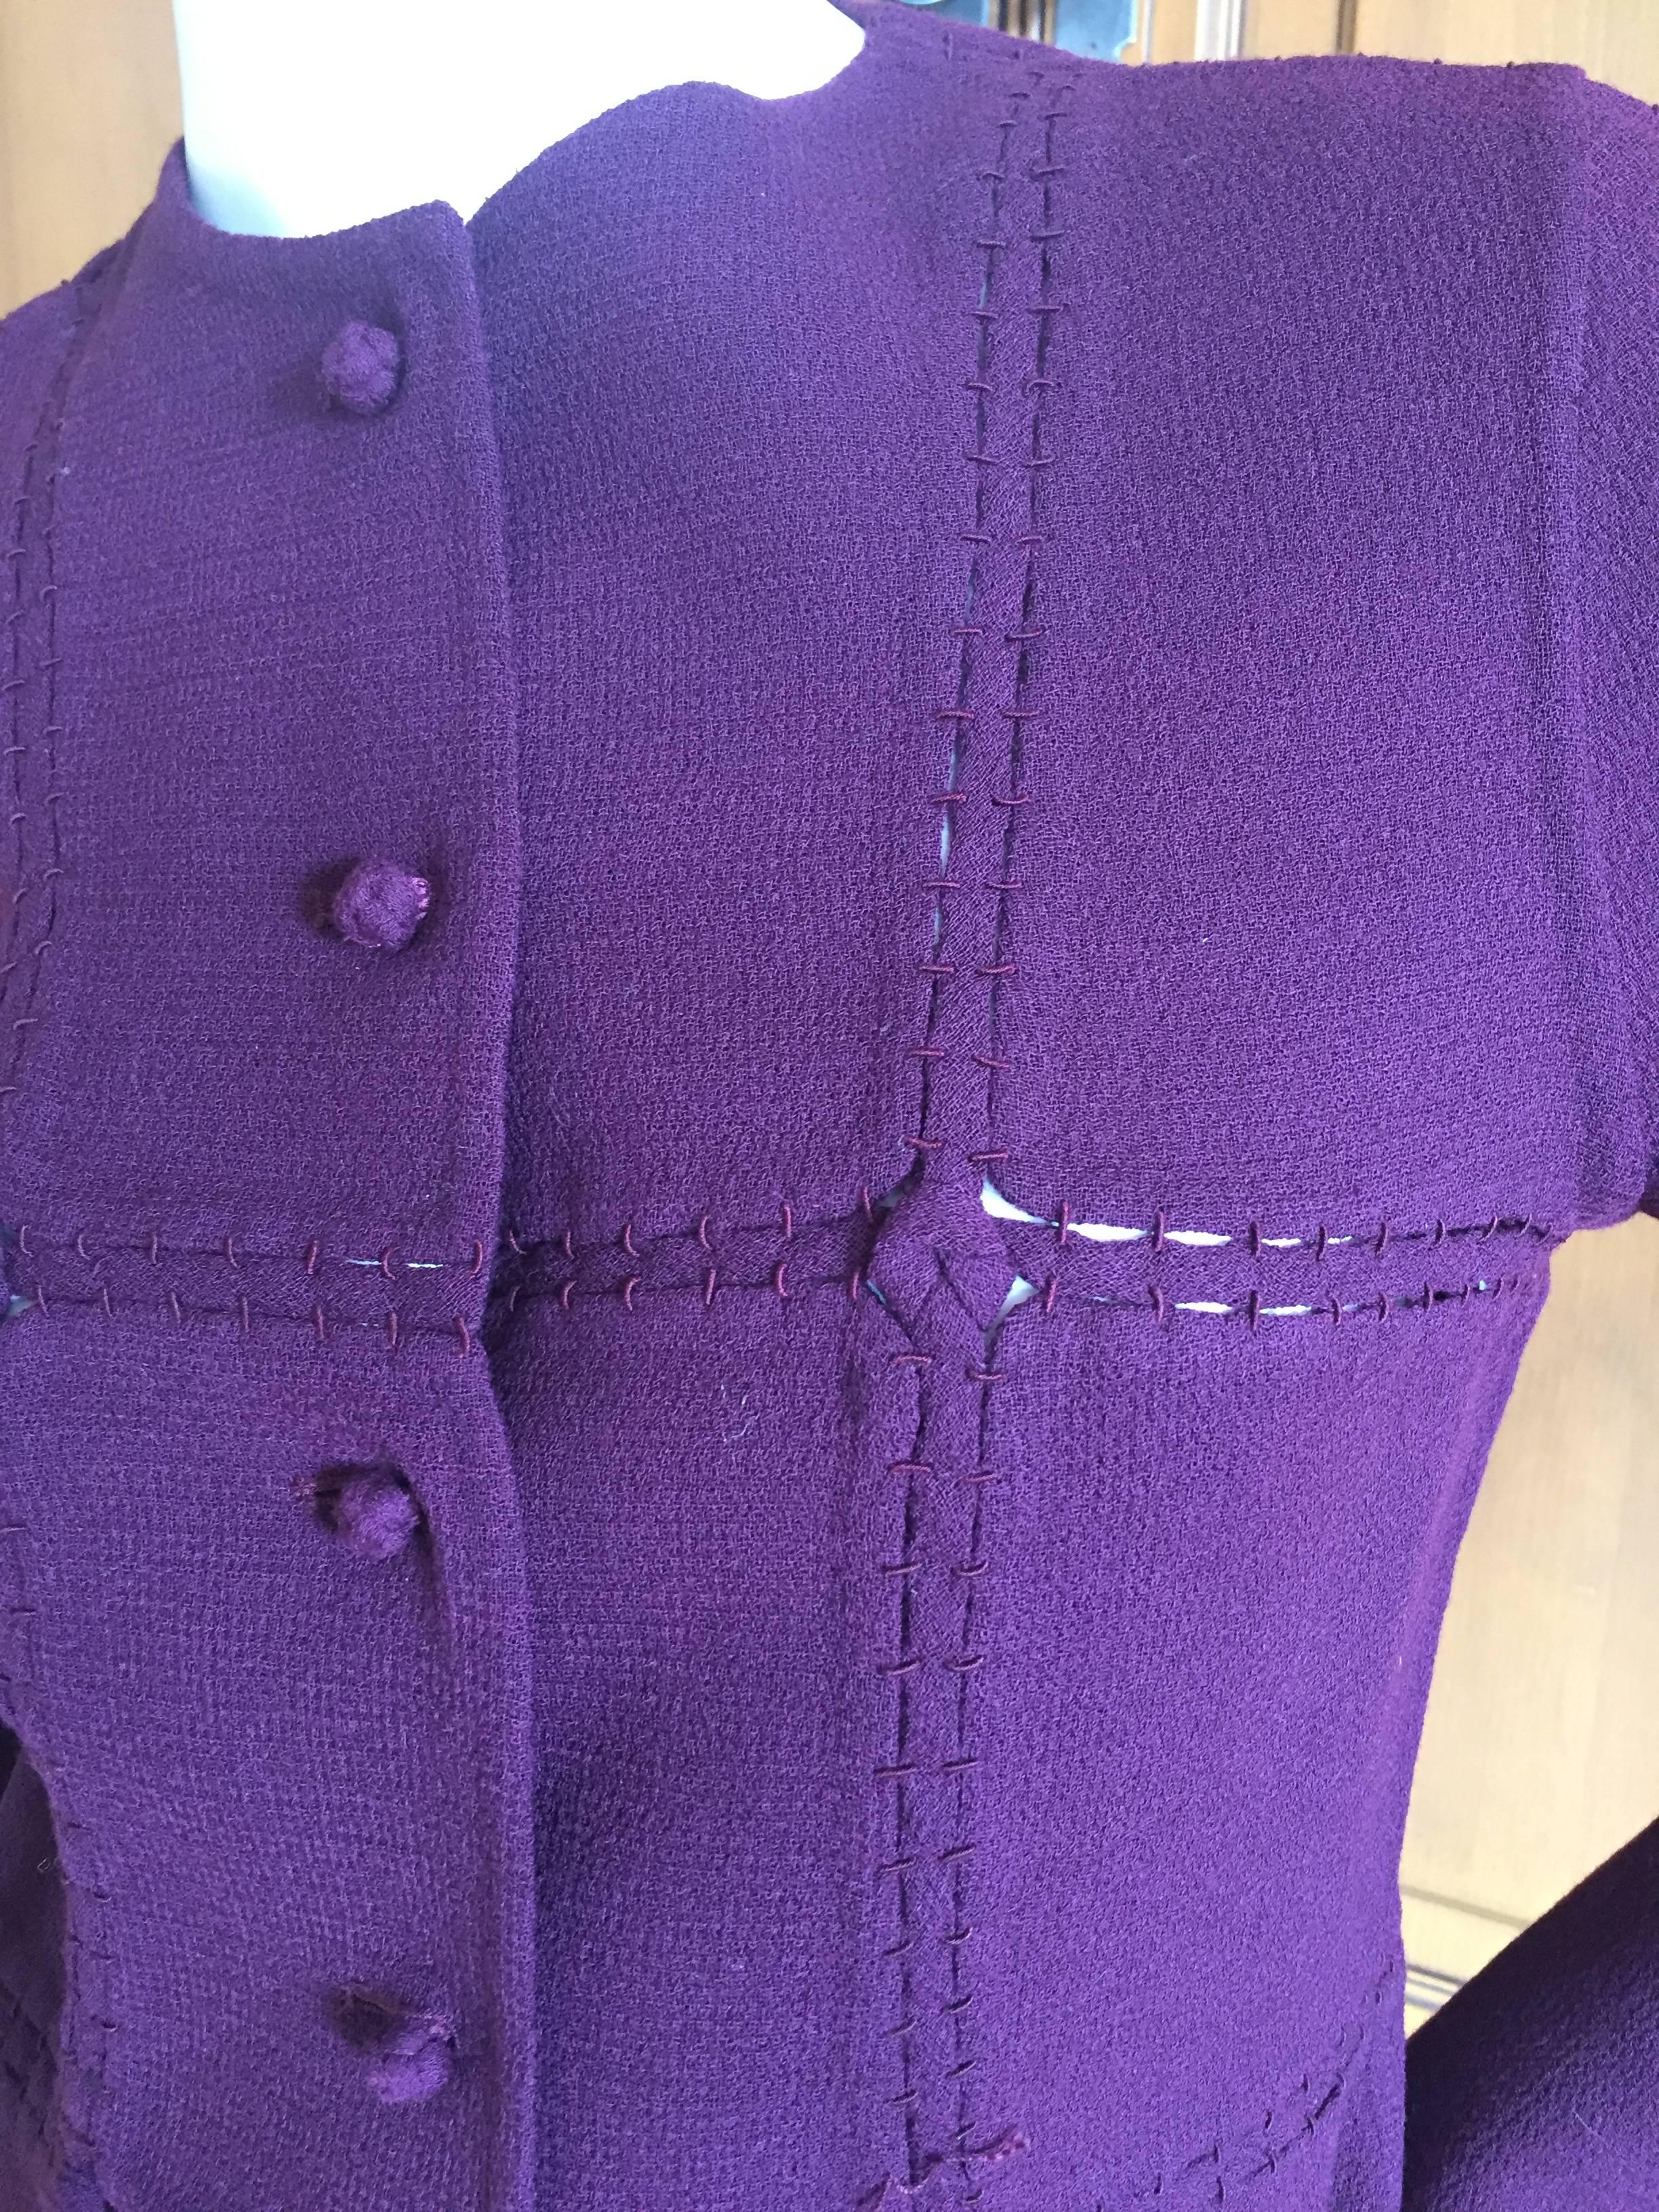 Chado Ralph Rucci Purple Jacket with Open Stitch Details  For Sale 4